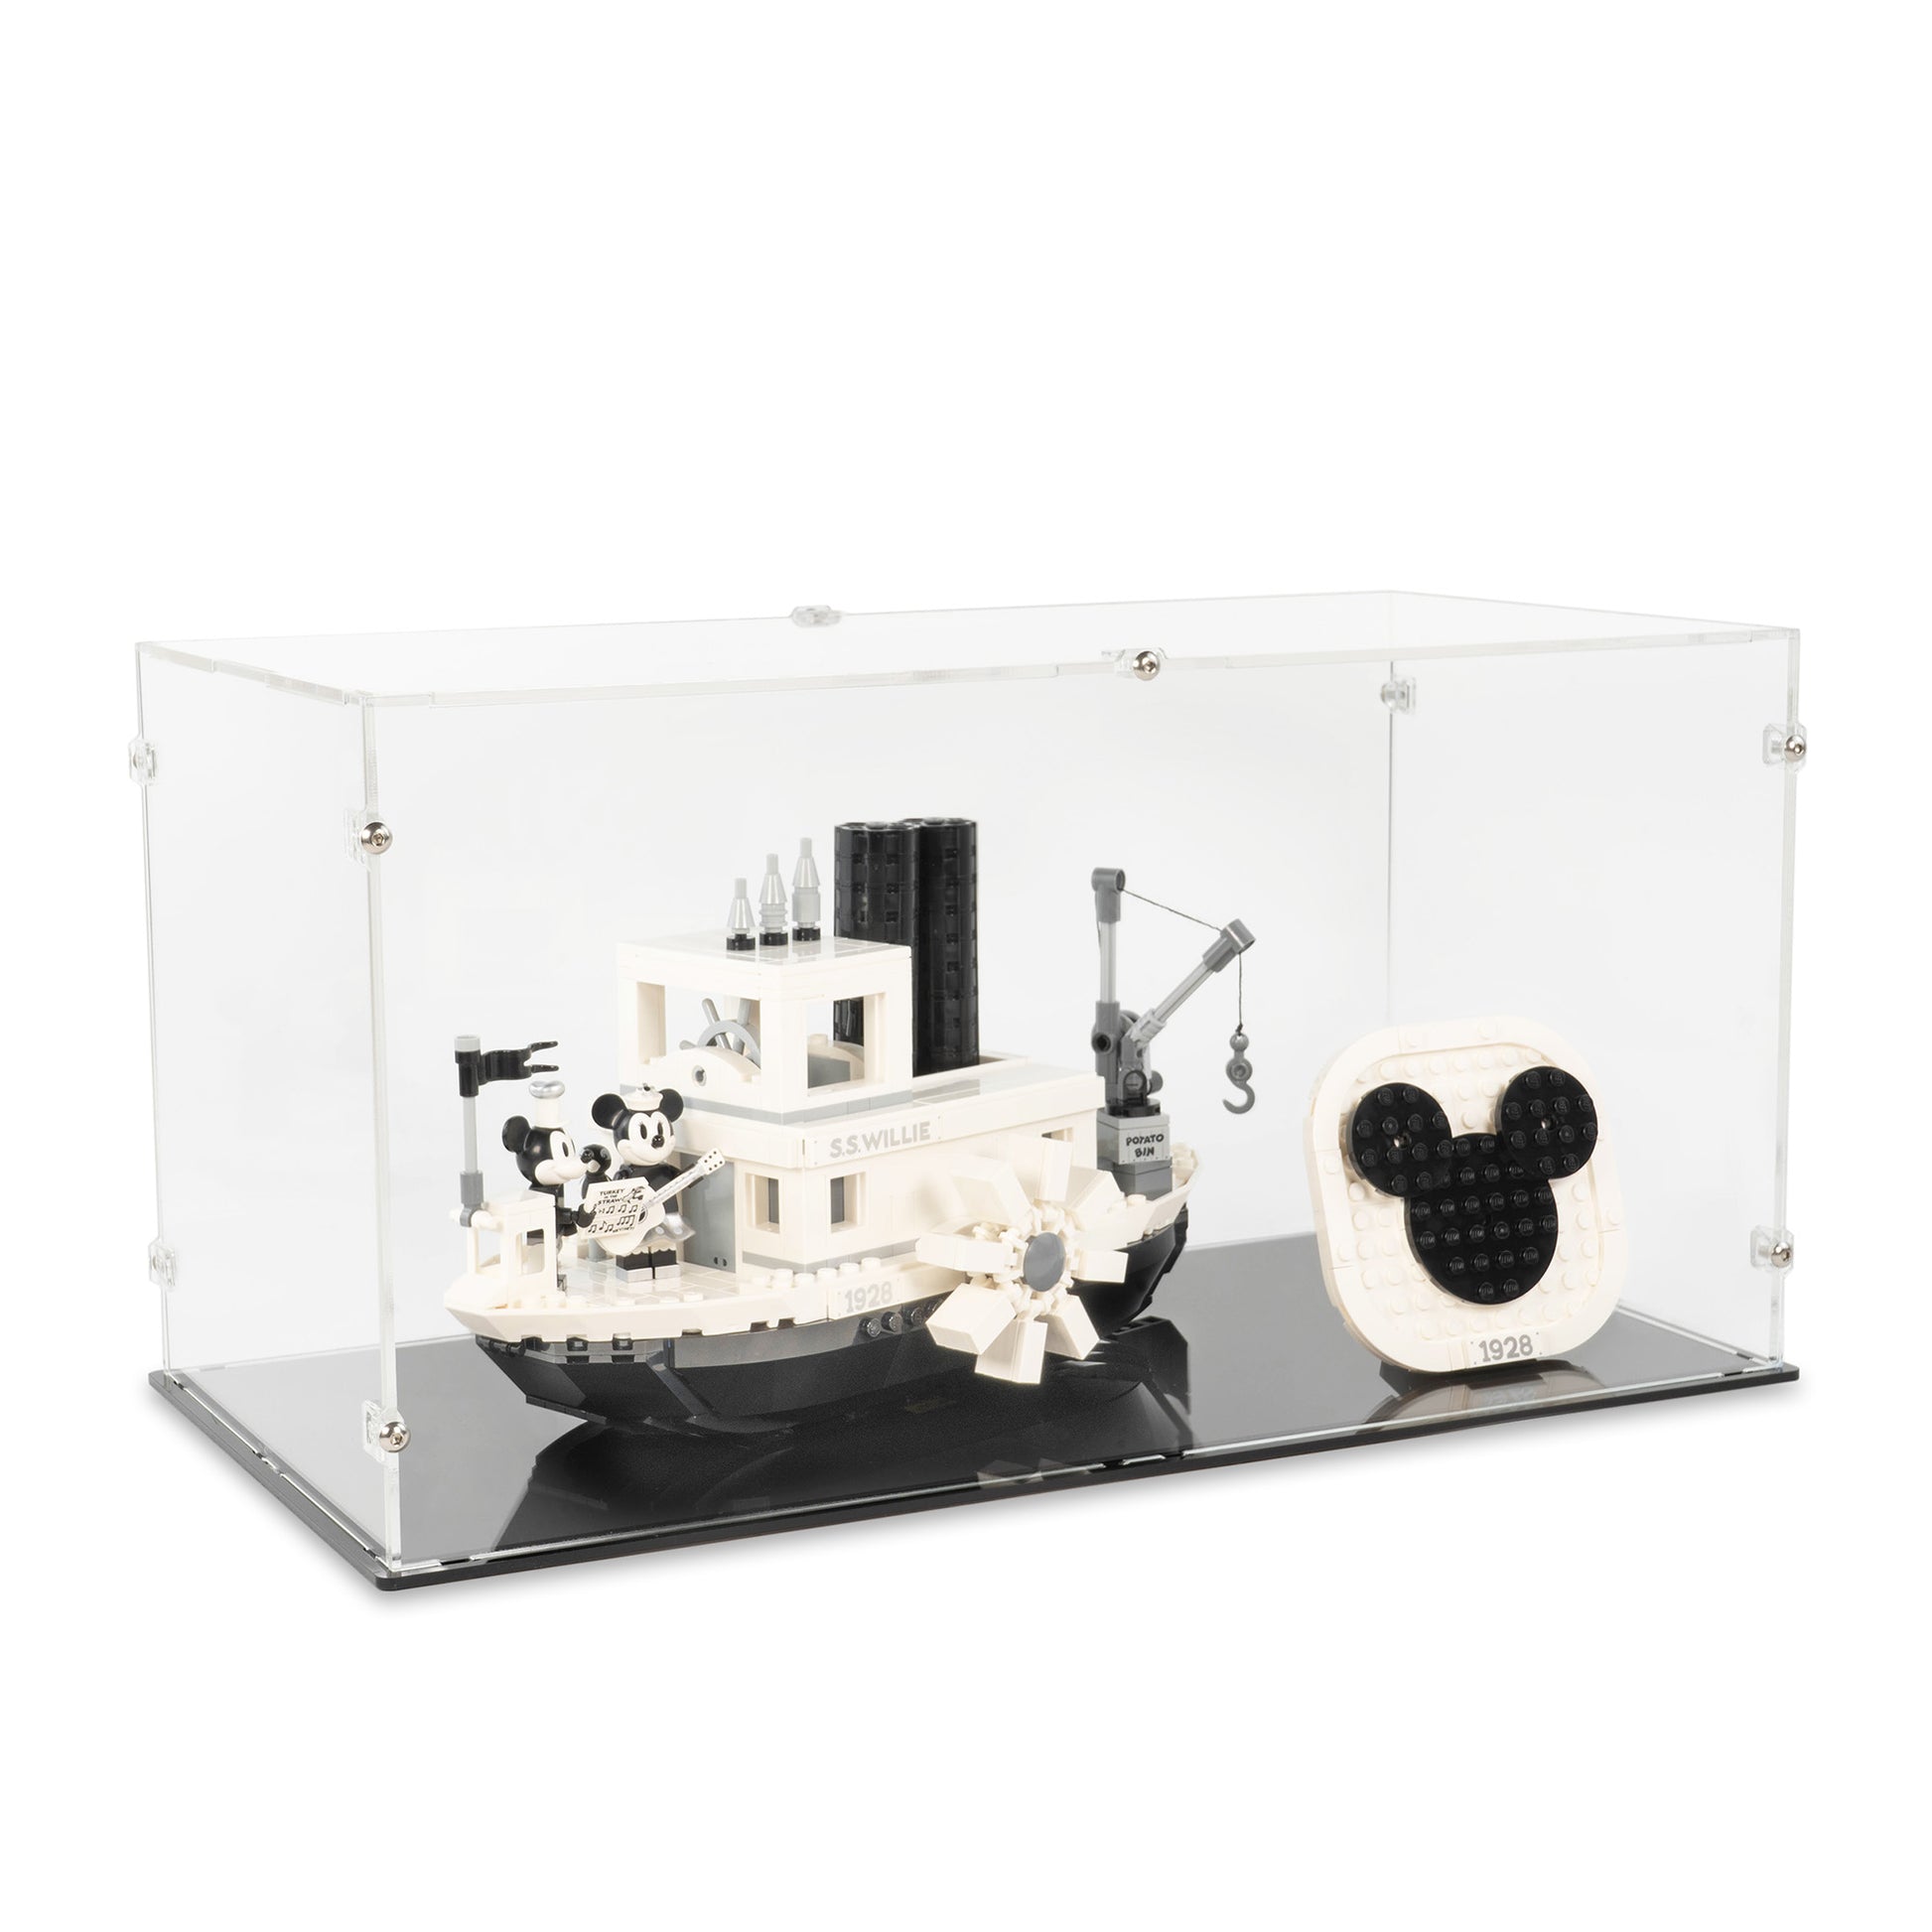 Angled top view of LEGO 21317 Steamboat Willie Display Case.